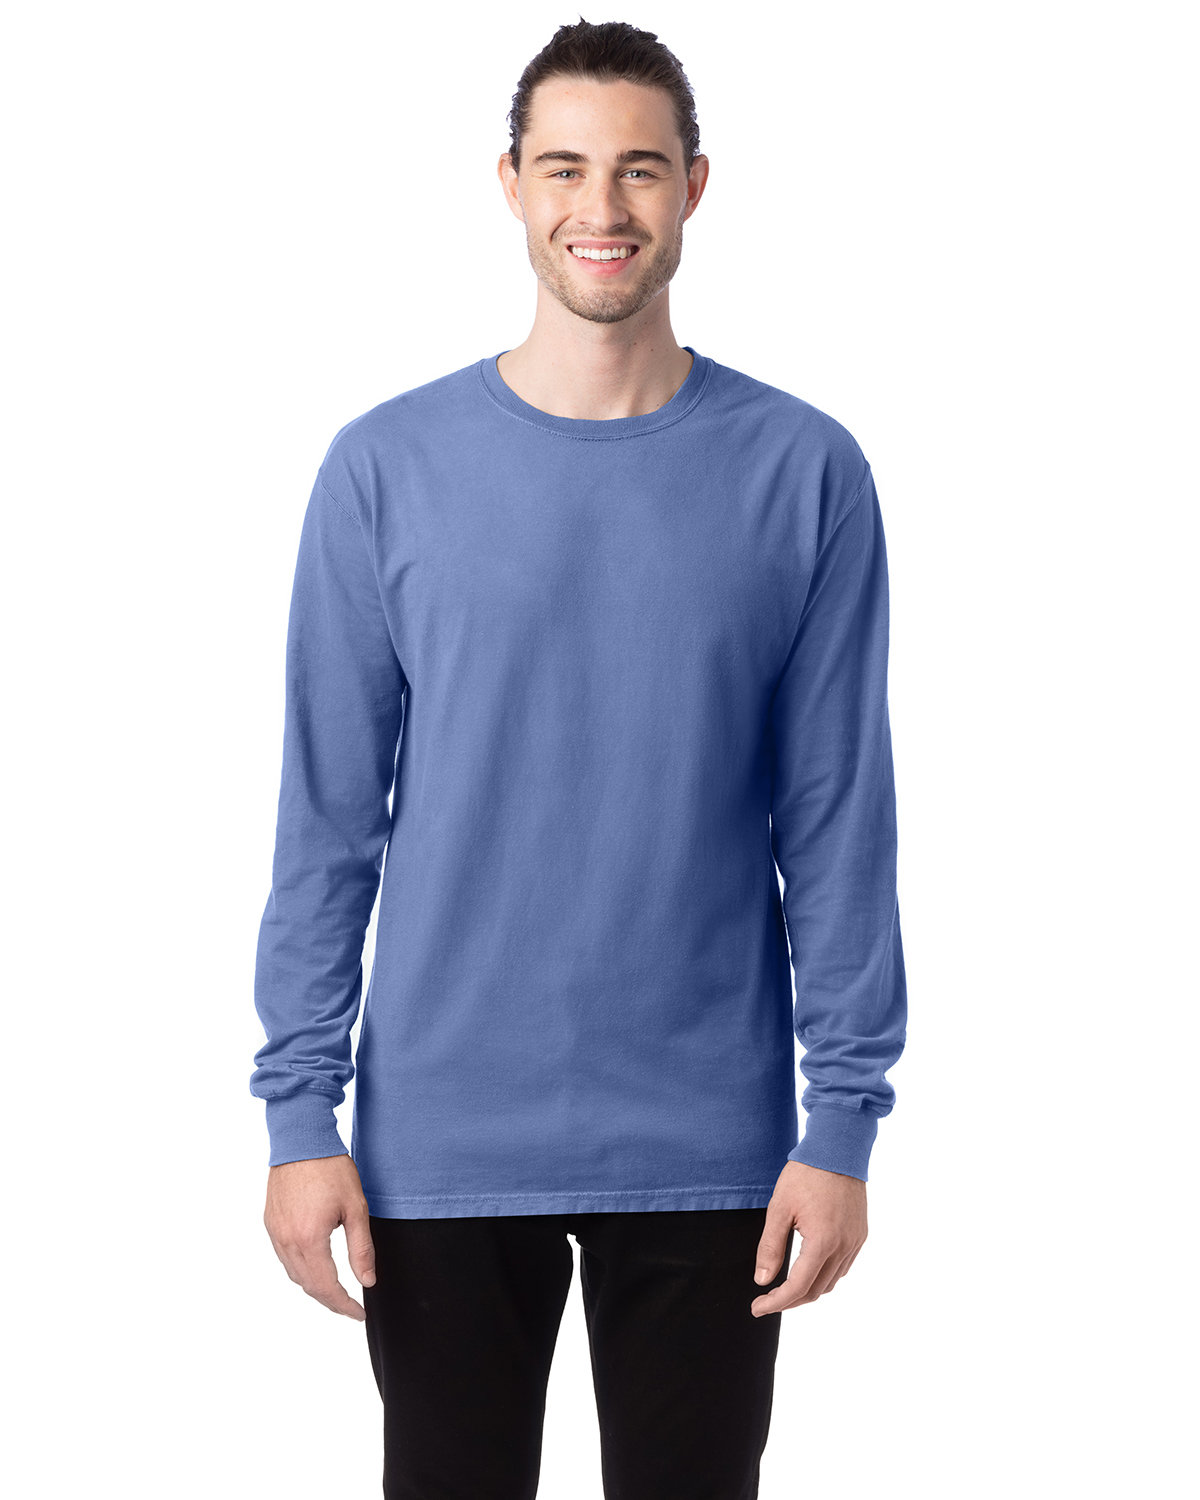 ComfortWash by Hanes Unisex Garment-Dyed Long-Sleeve T-Shirt FRONTIER BLUE 